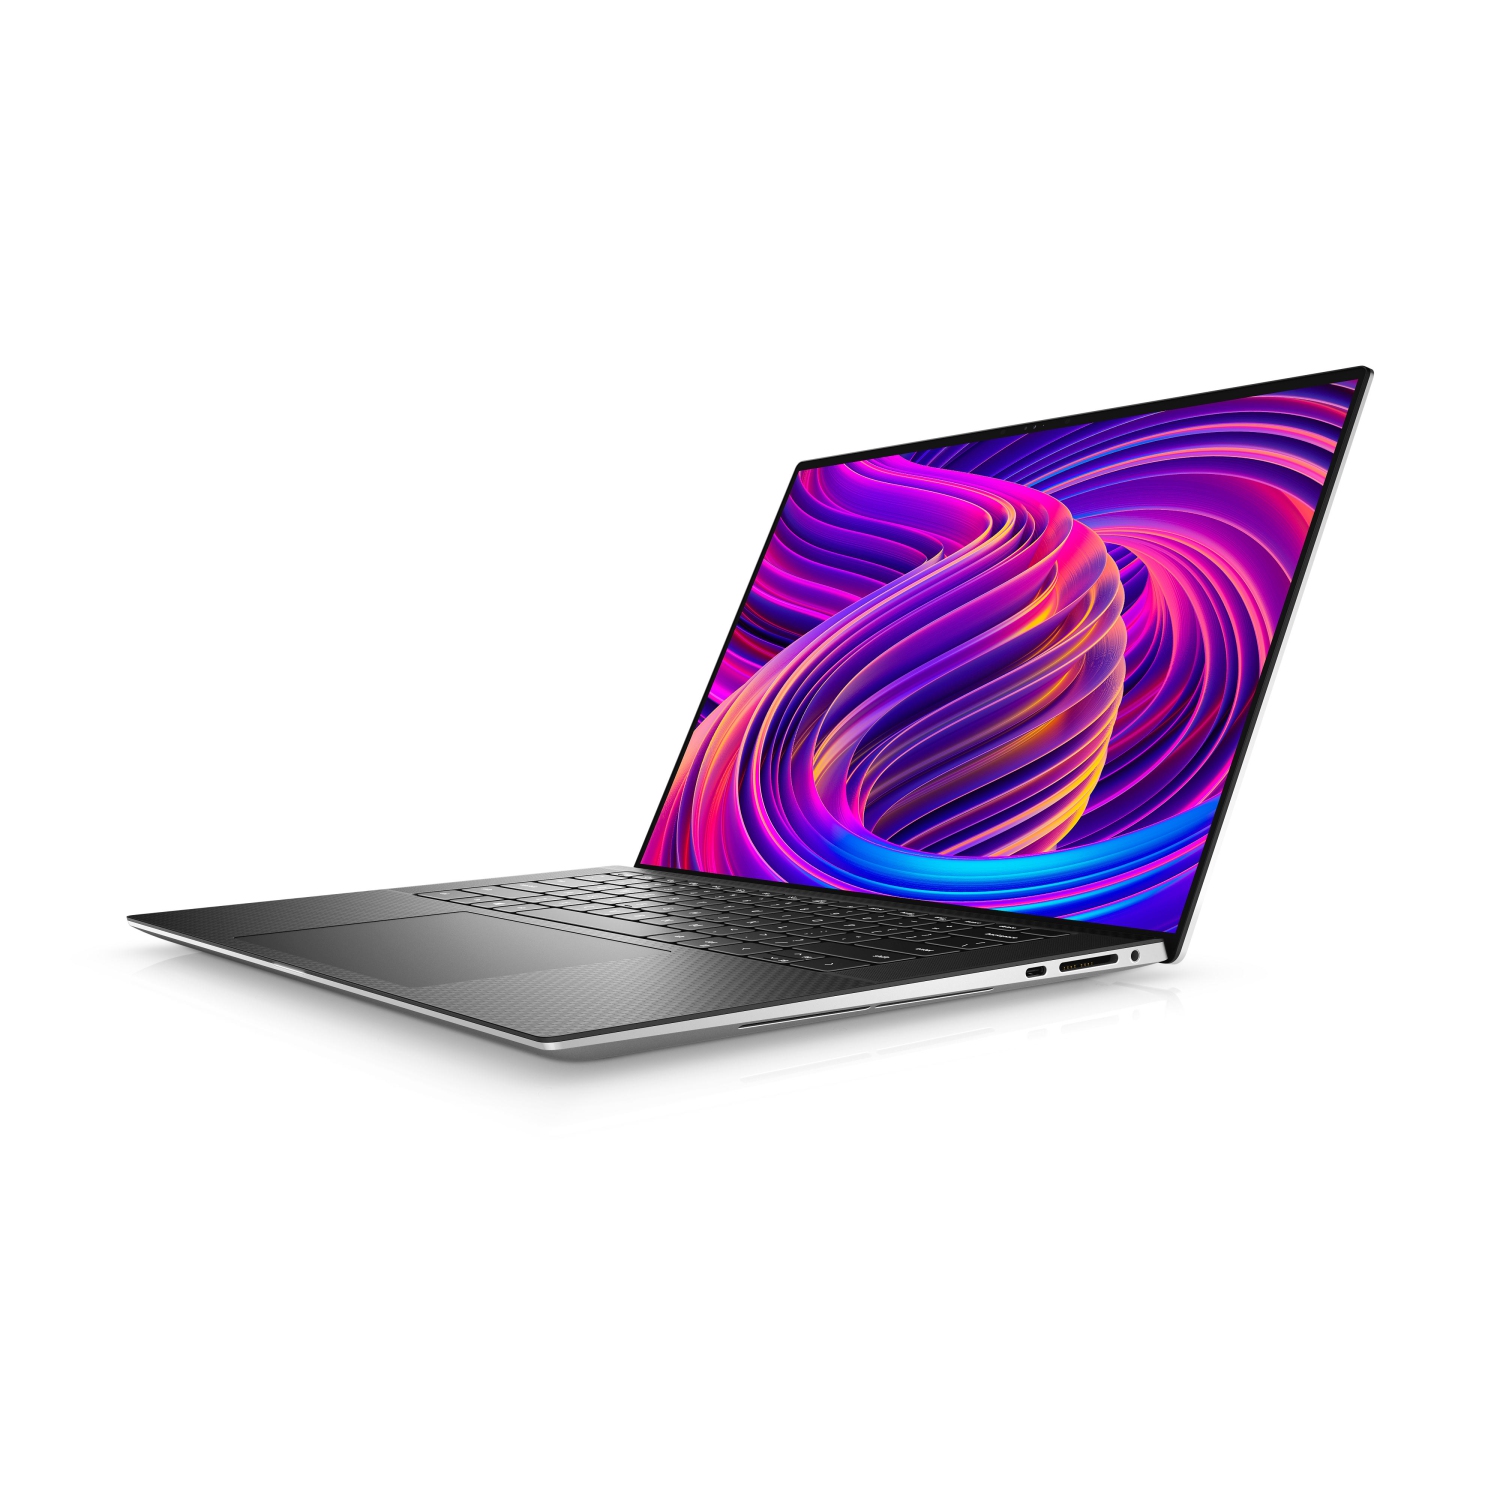 Refurbished (Excellent) - Dell XPS 15 9510 Laptop (2021) | 15.6" FHD+ | Core i5 - 1TB SSD - 16GB RAM | 6 Cores @ 4.5 GHz - 11th Gen CPU Certified Refurbished